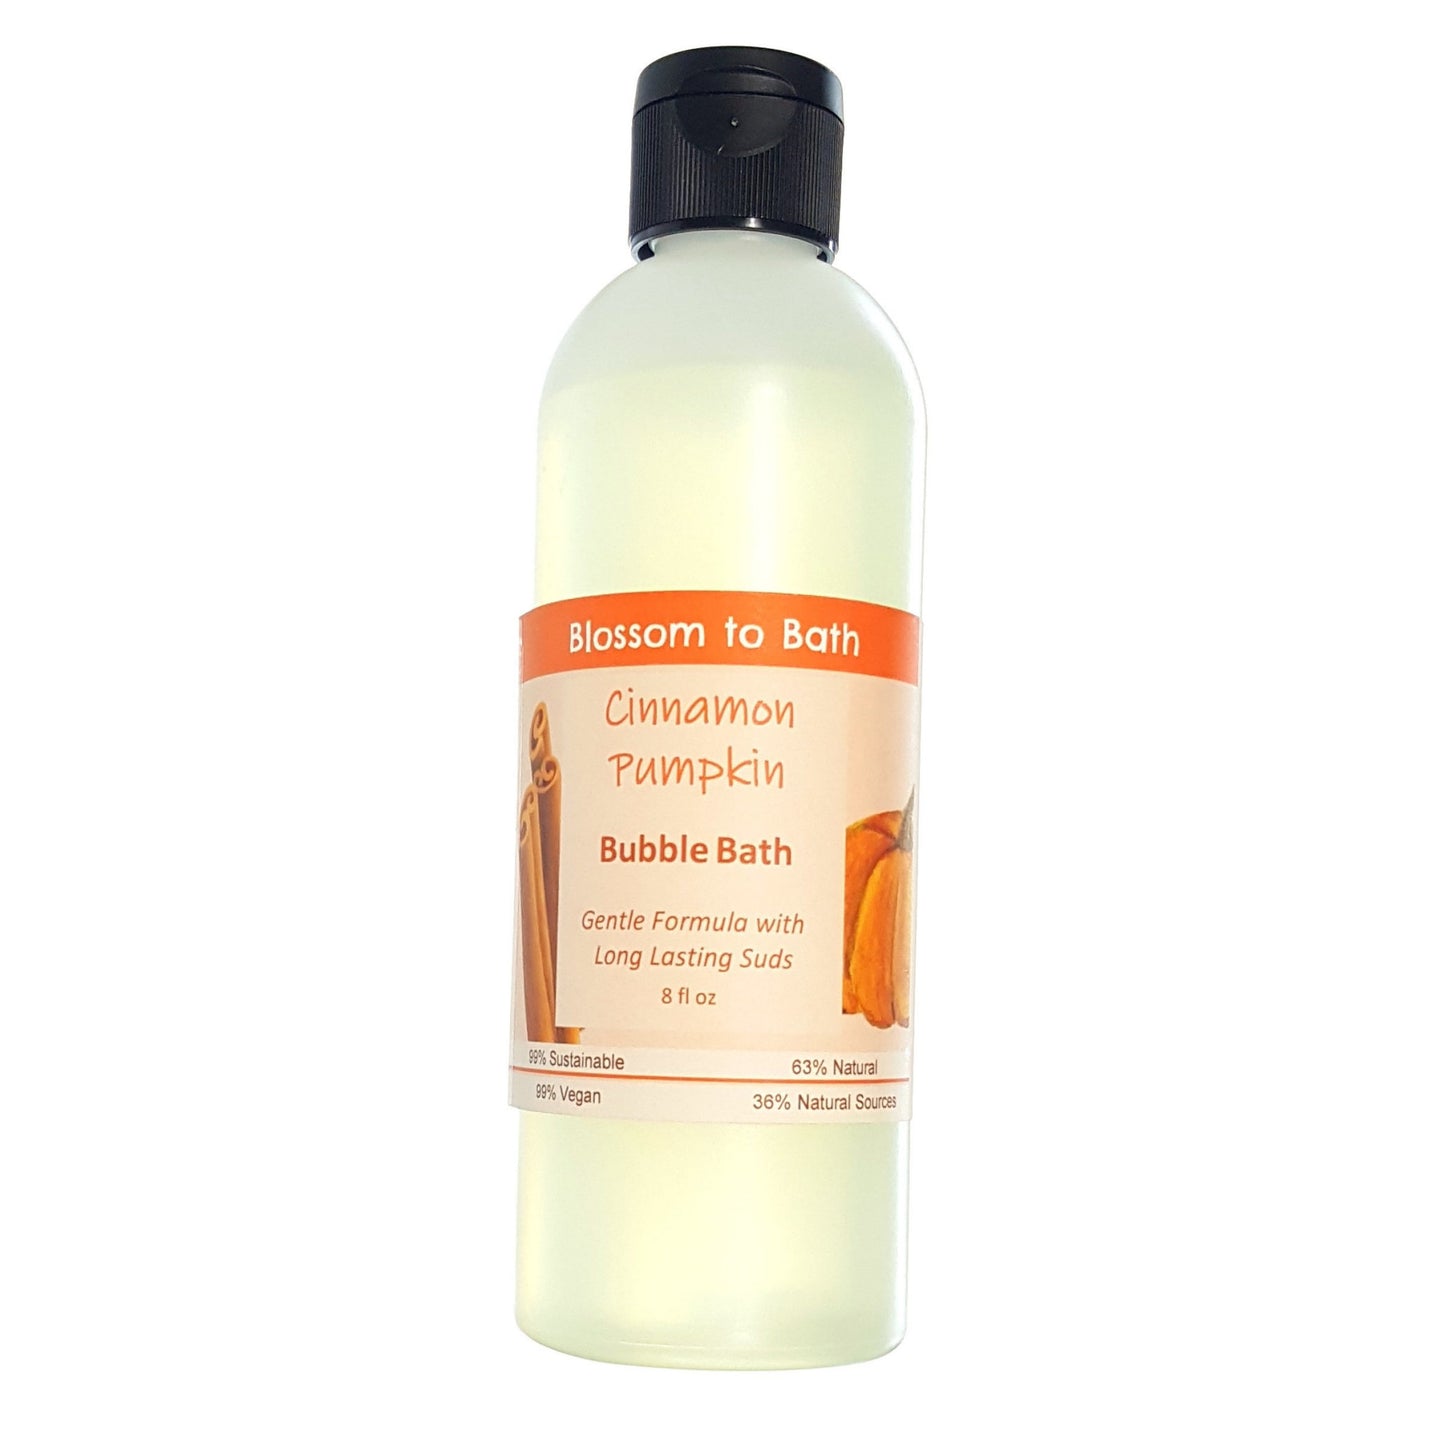 Buy Blossom to Bath Cinnamon Pumpkin Bubble Bath from Flowersong Soap Studio.  Lively, long lasting  bubbles in a gentle plant based formula for maximum relaxation time  An engaging, cheerful scent filled with sweet vanilla and warm spice.